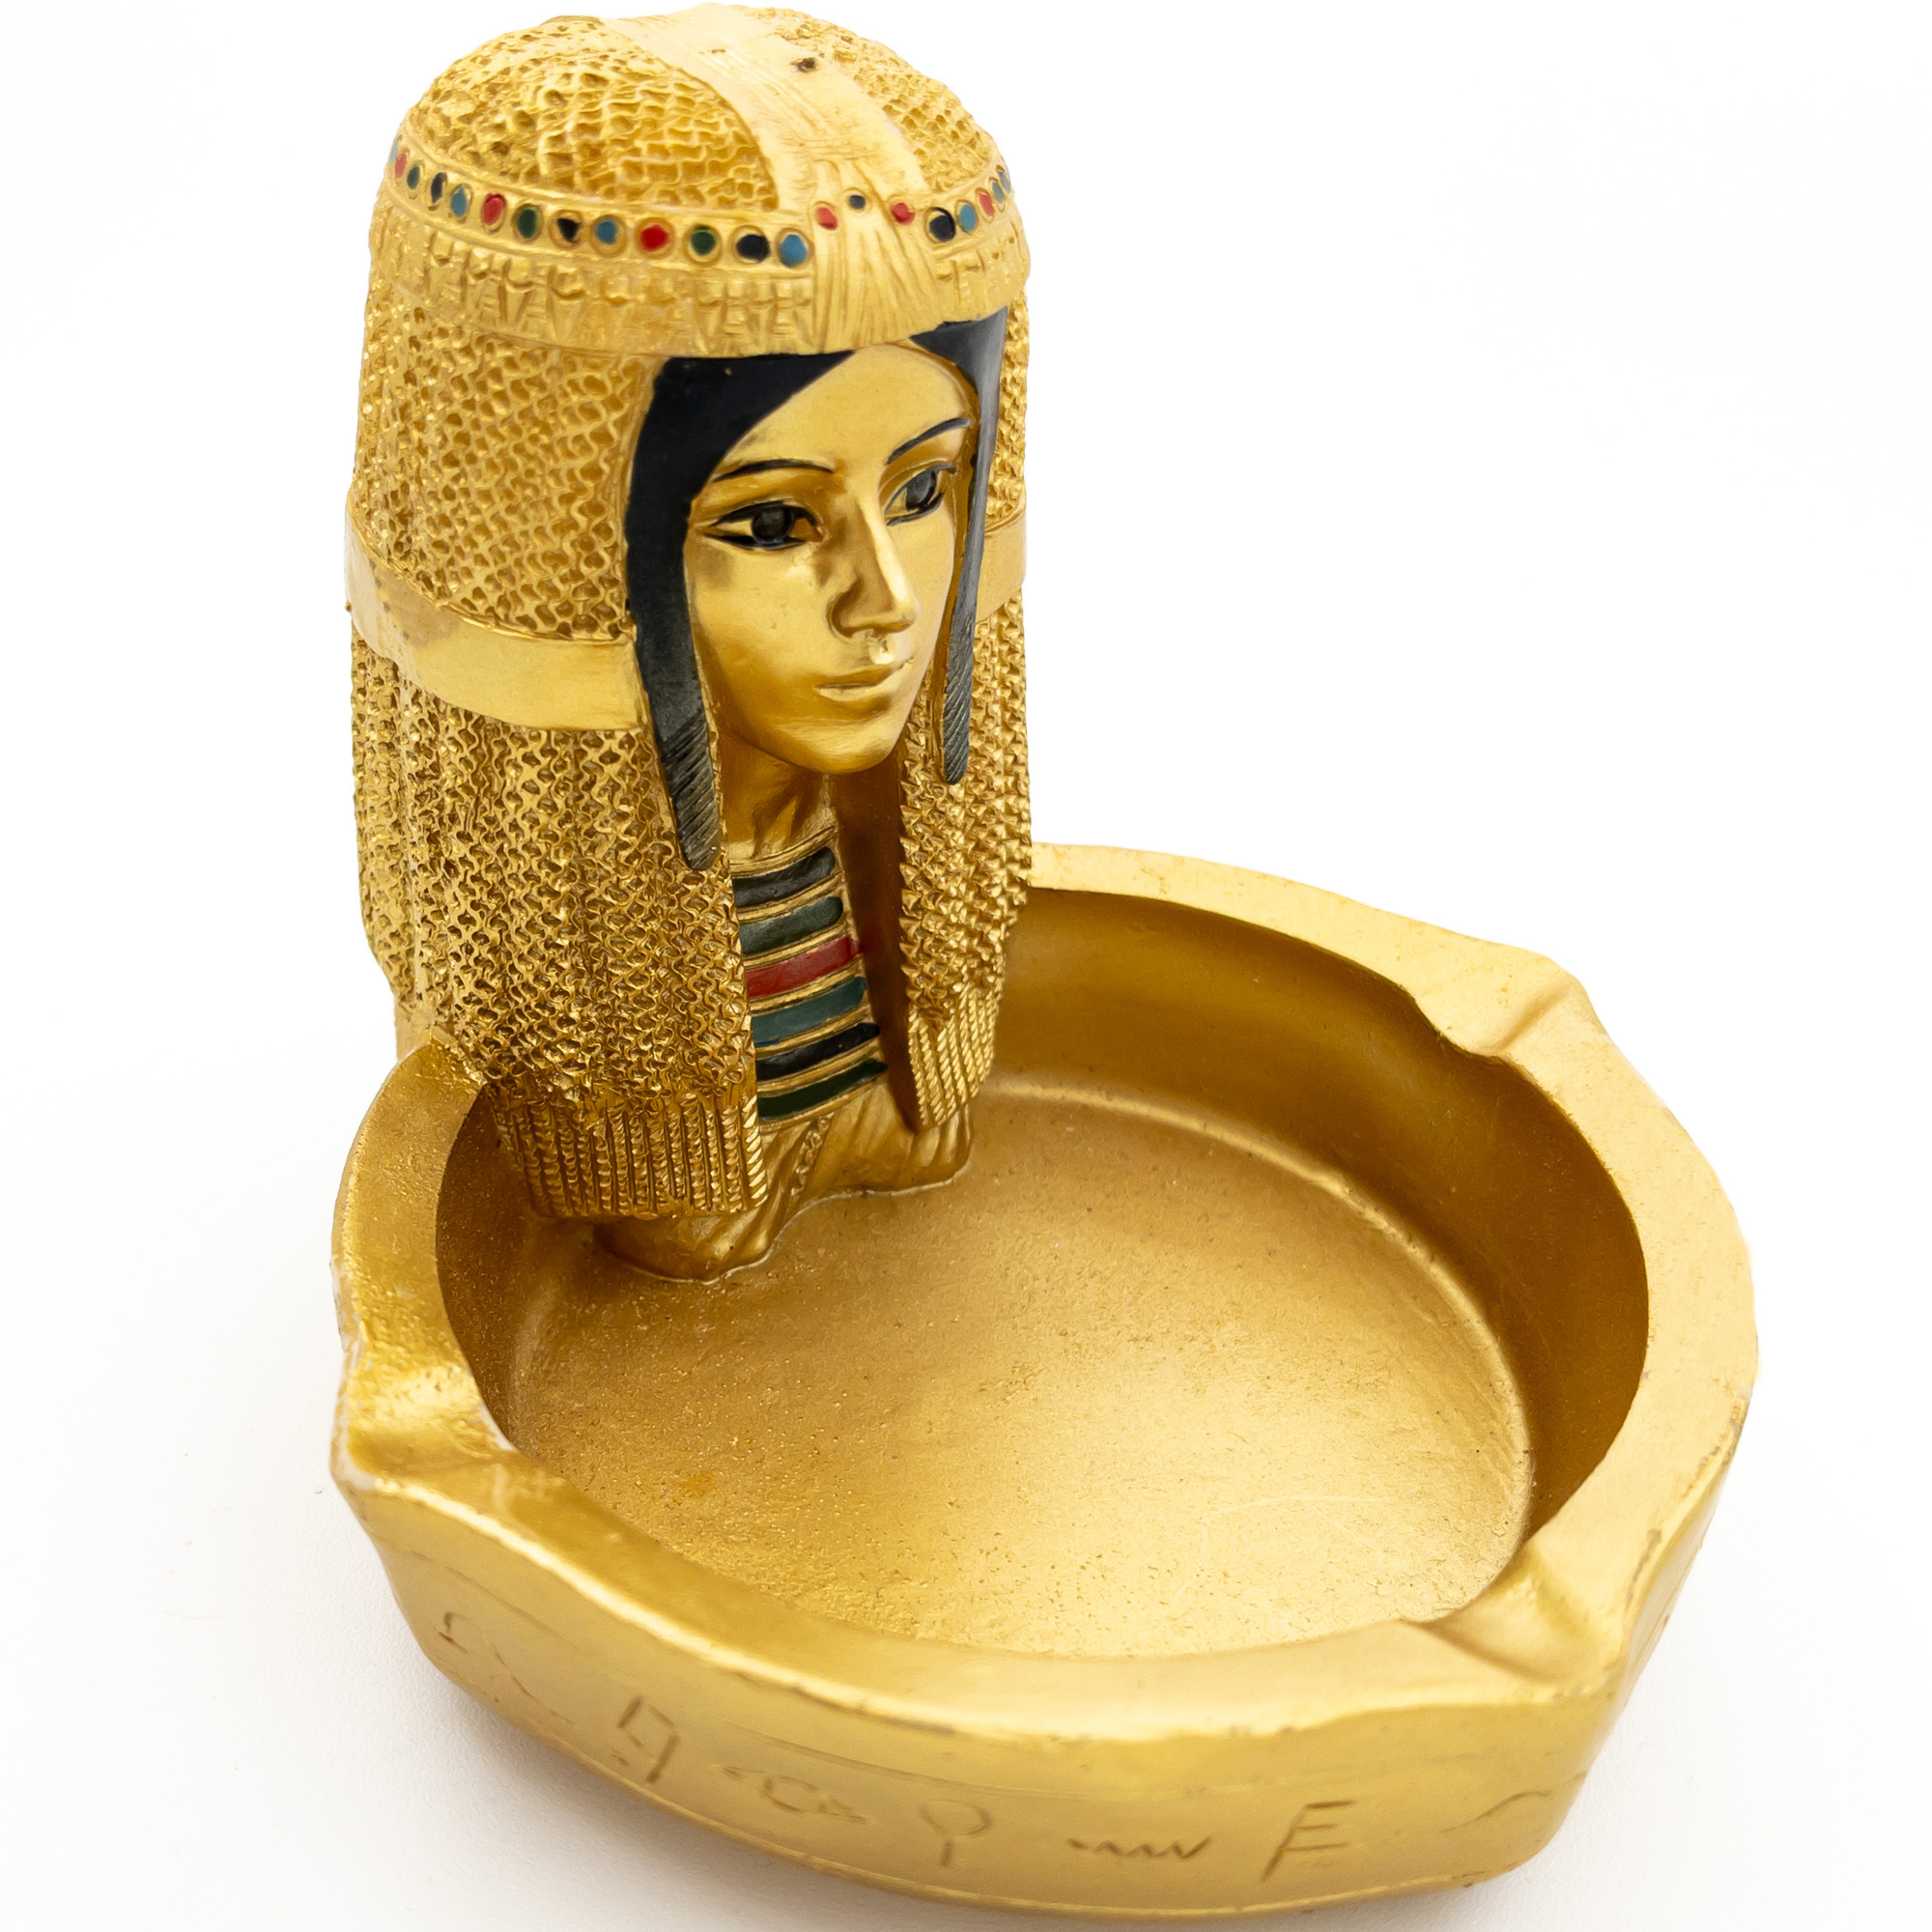 View from the Nile Novelty Ancient Egypt Themed Ashtray